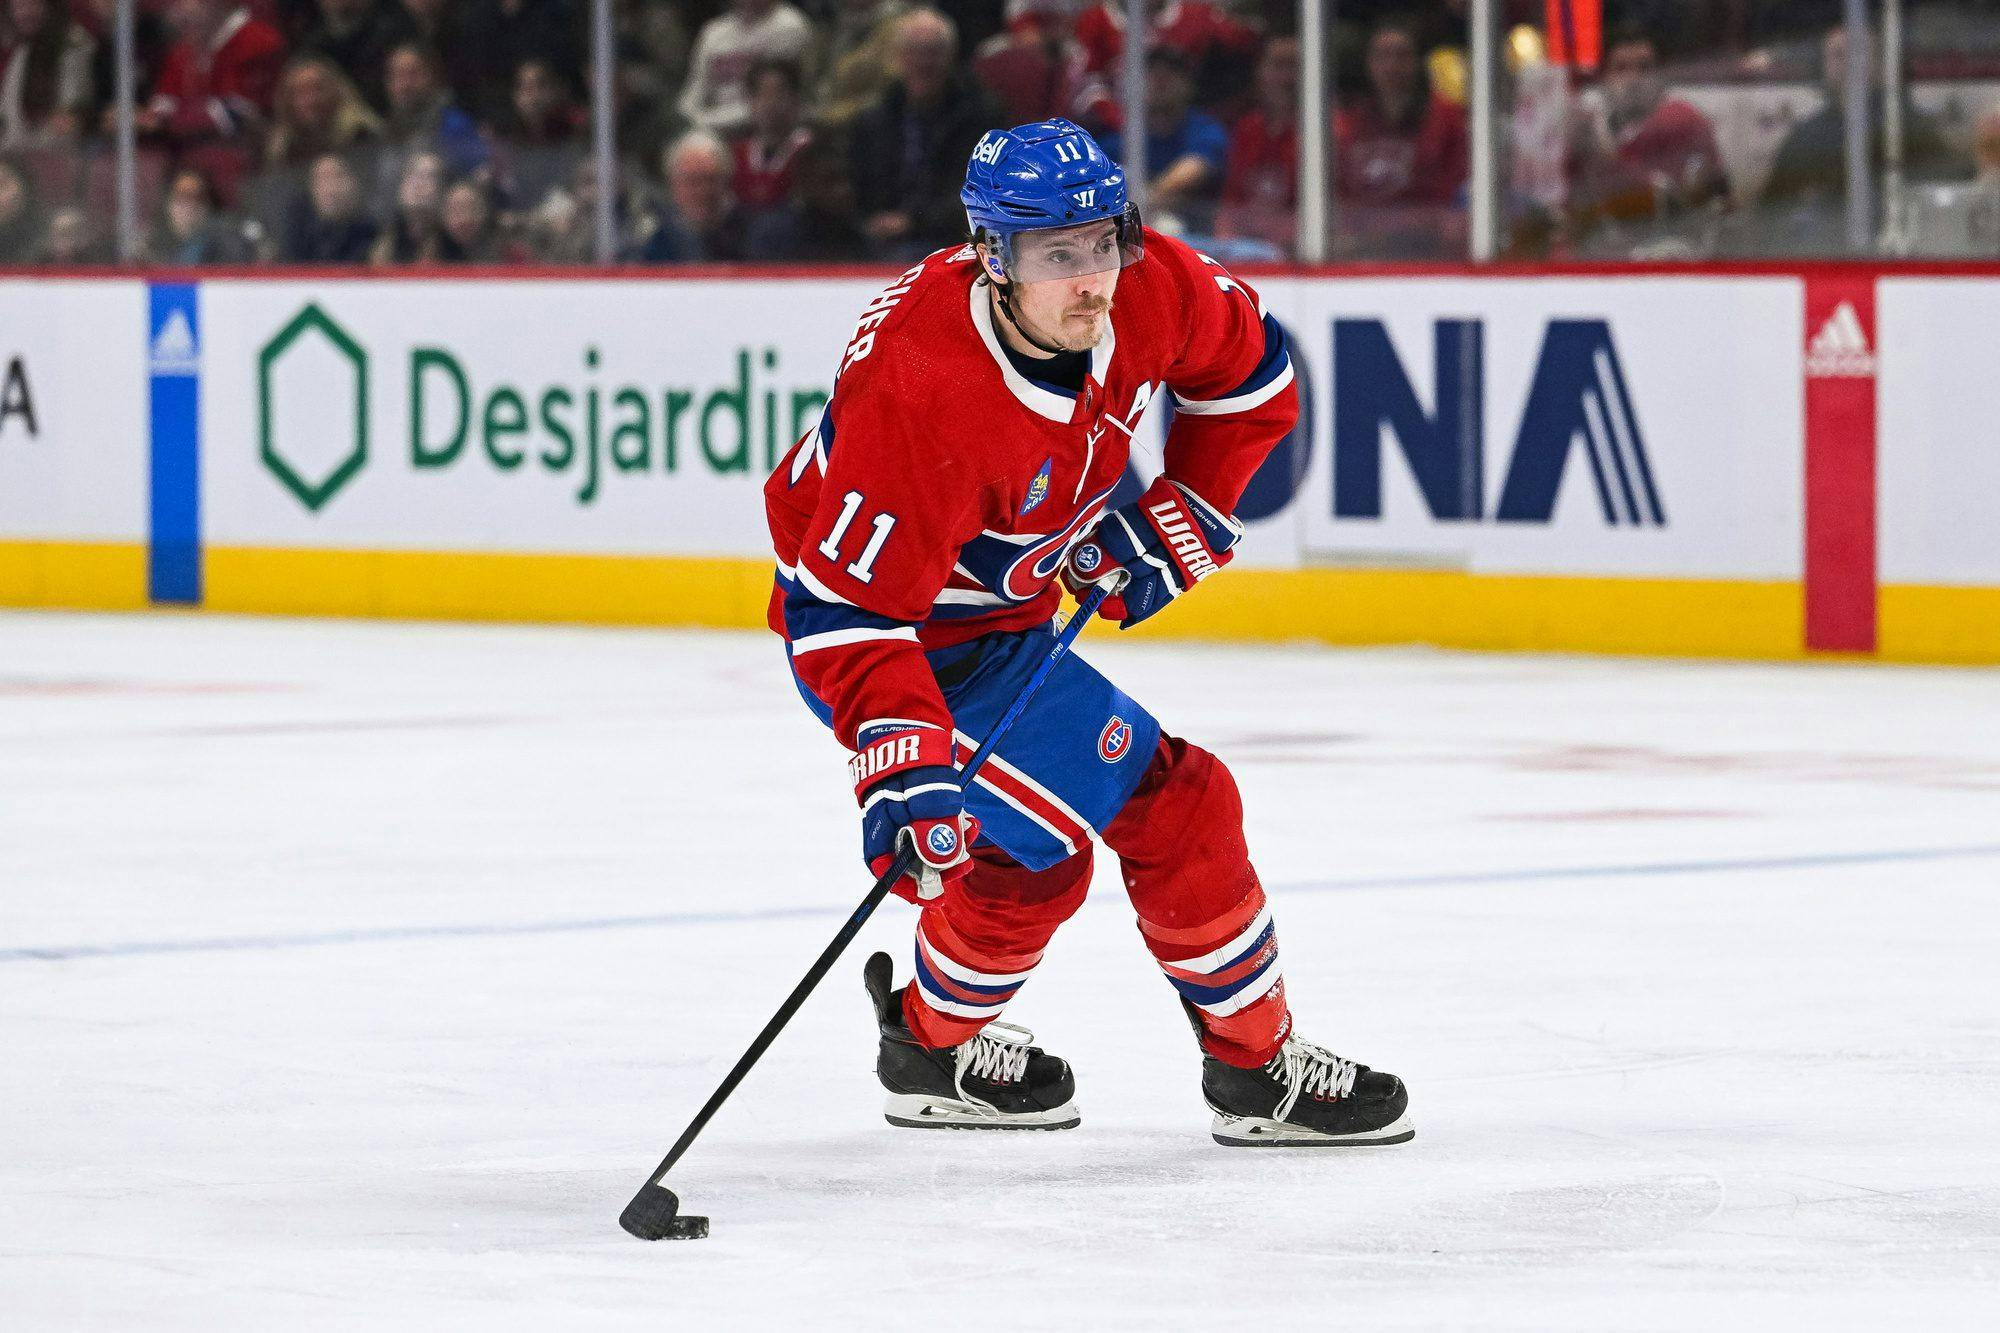 Dissecting the Brendan Gallagher hit: What’s the right punishment?